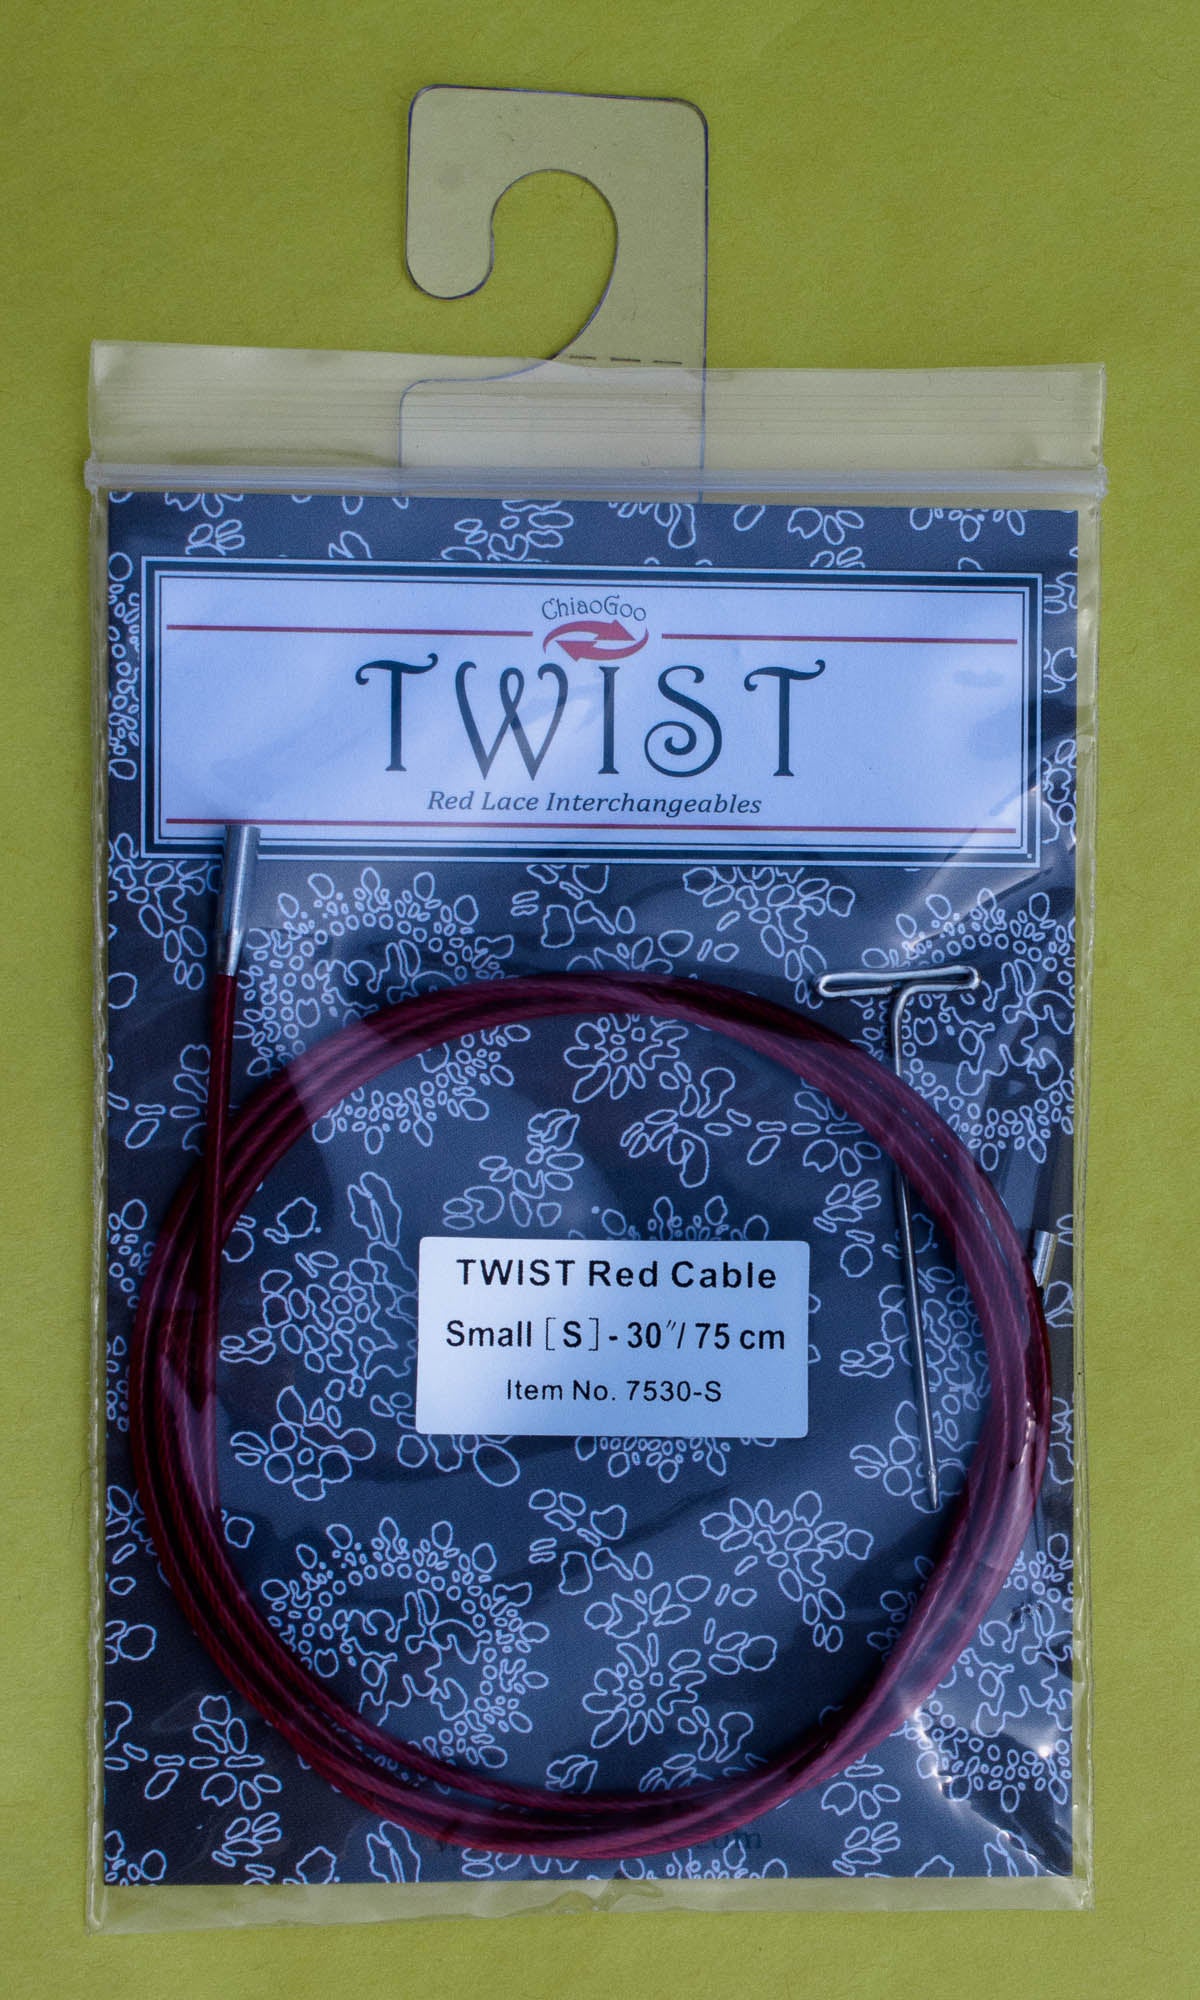  ChiaoGoo Twist Small Lace Interchangeable Cables, 37-Inch, Red